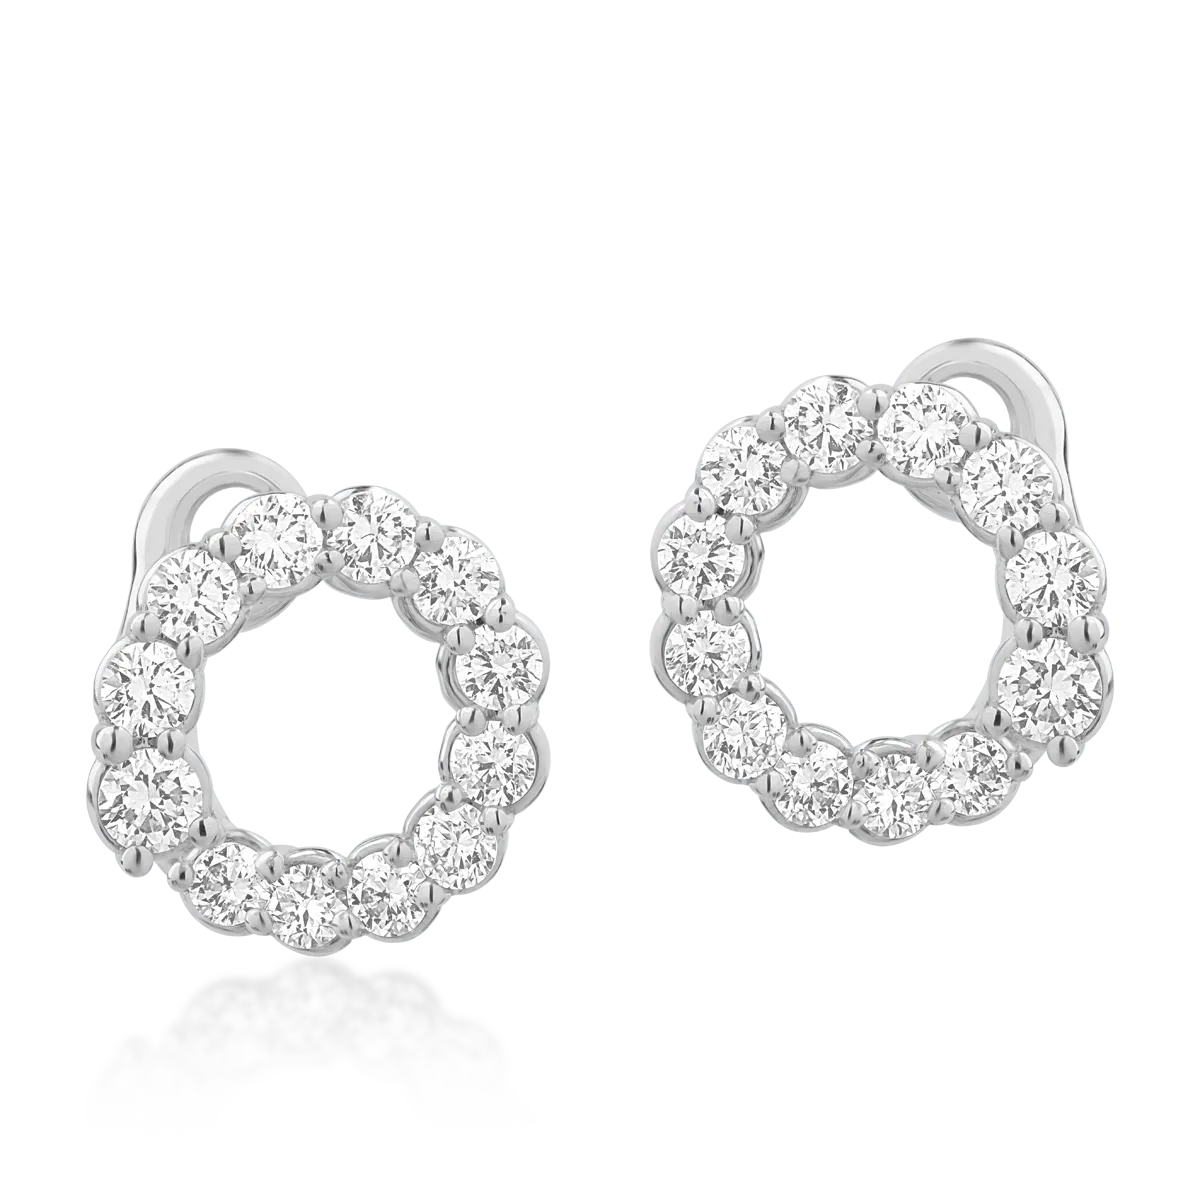 18K white gold earrings with 1ct diamonds